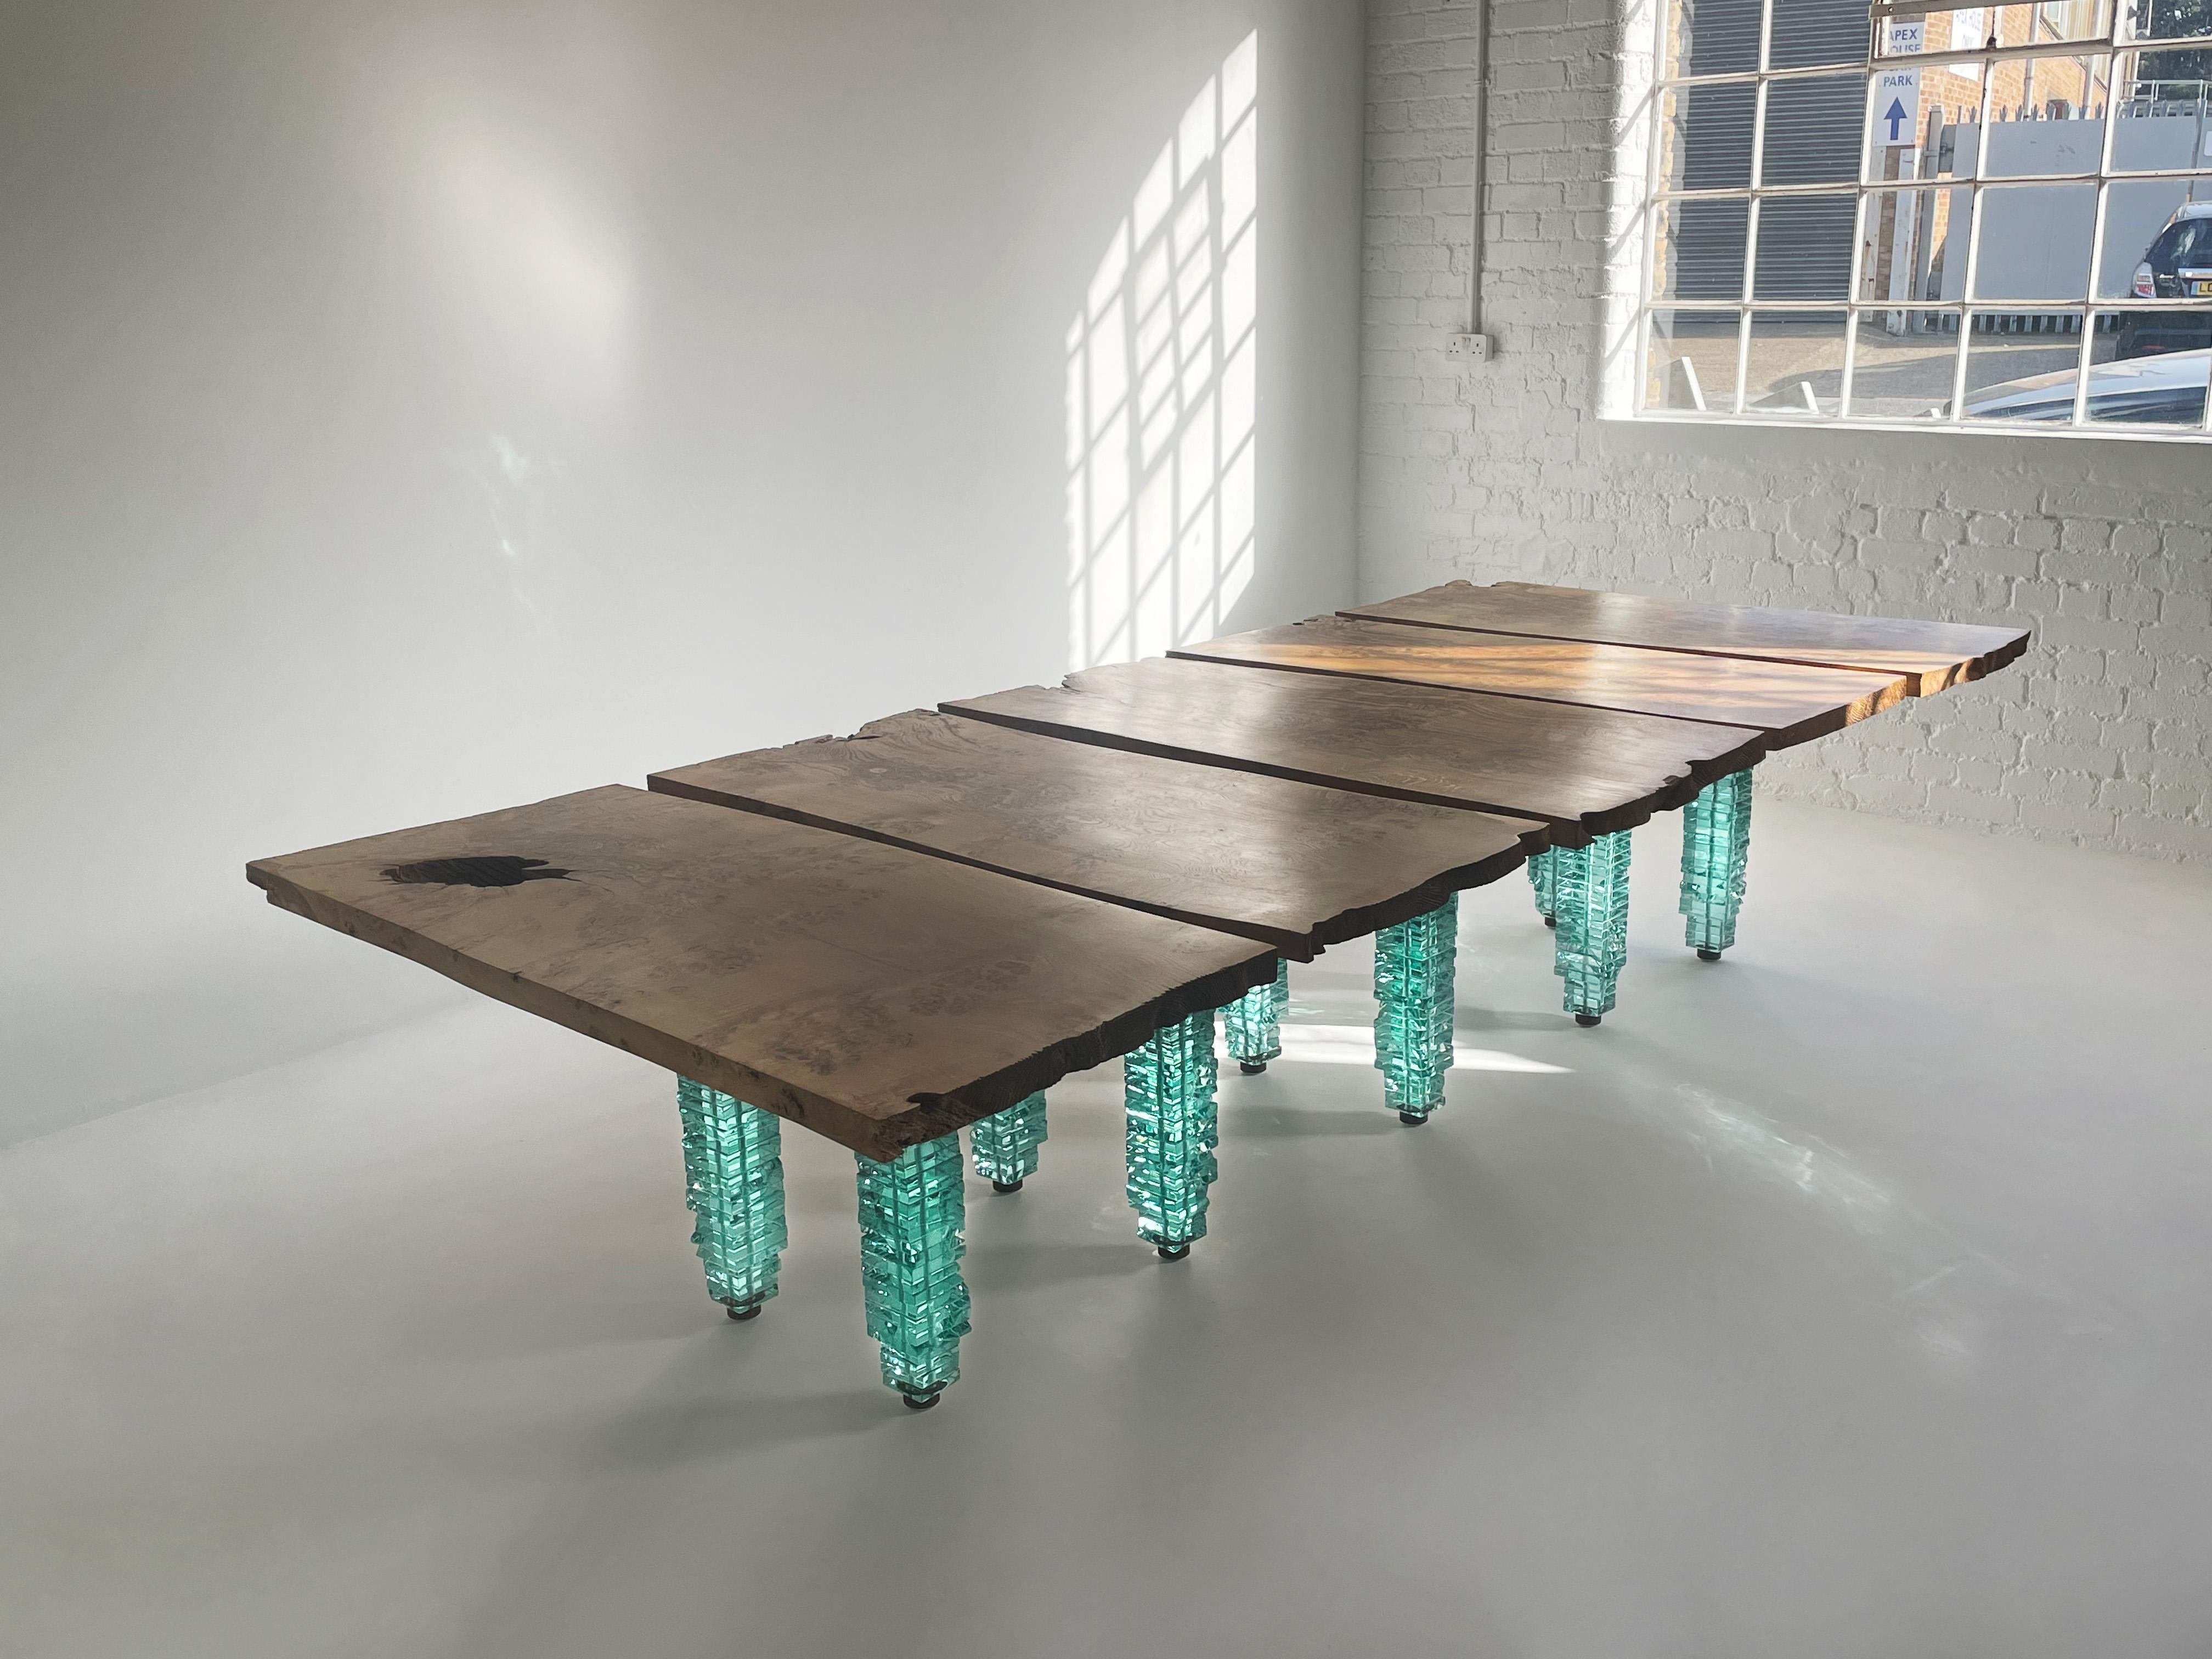 An absolutely spectacular dining / conference table by acclaimed glass and steel artist, Danny Lane. 

This unique table comprises five elements joined as one. Pre-tensioned glass towers support highly figured English Oak planks connected by